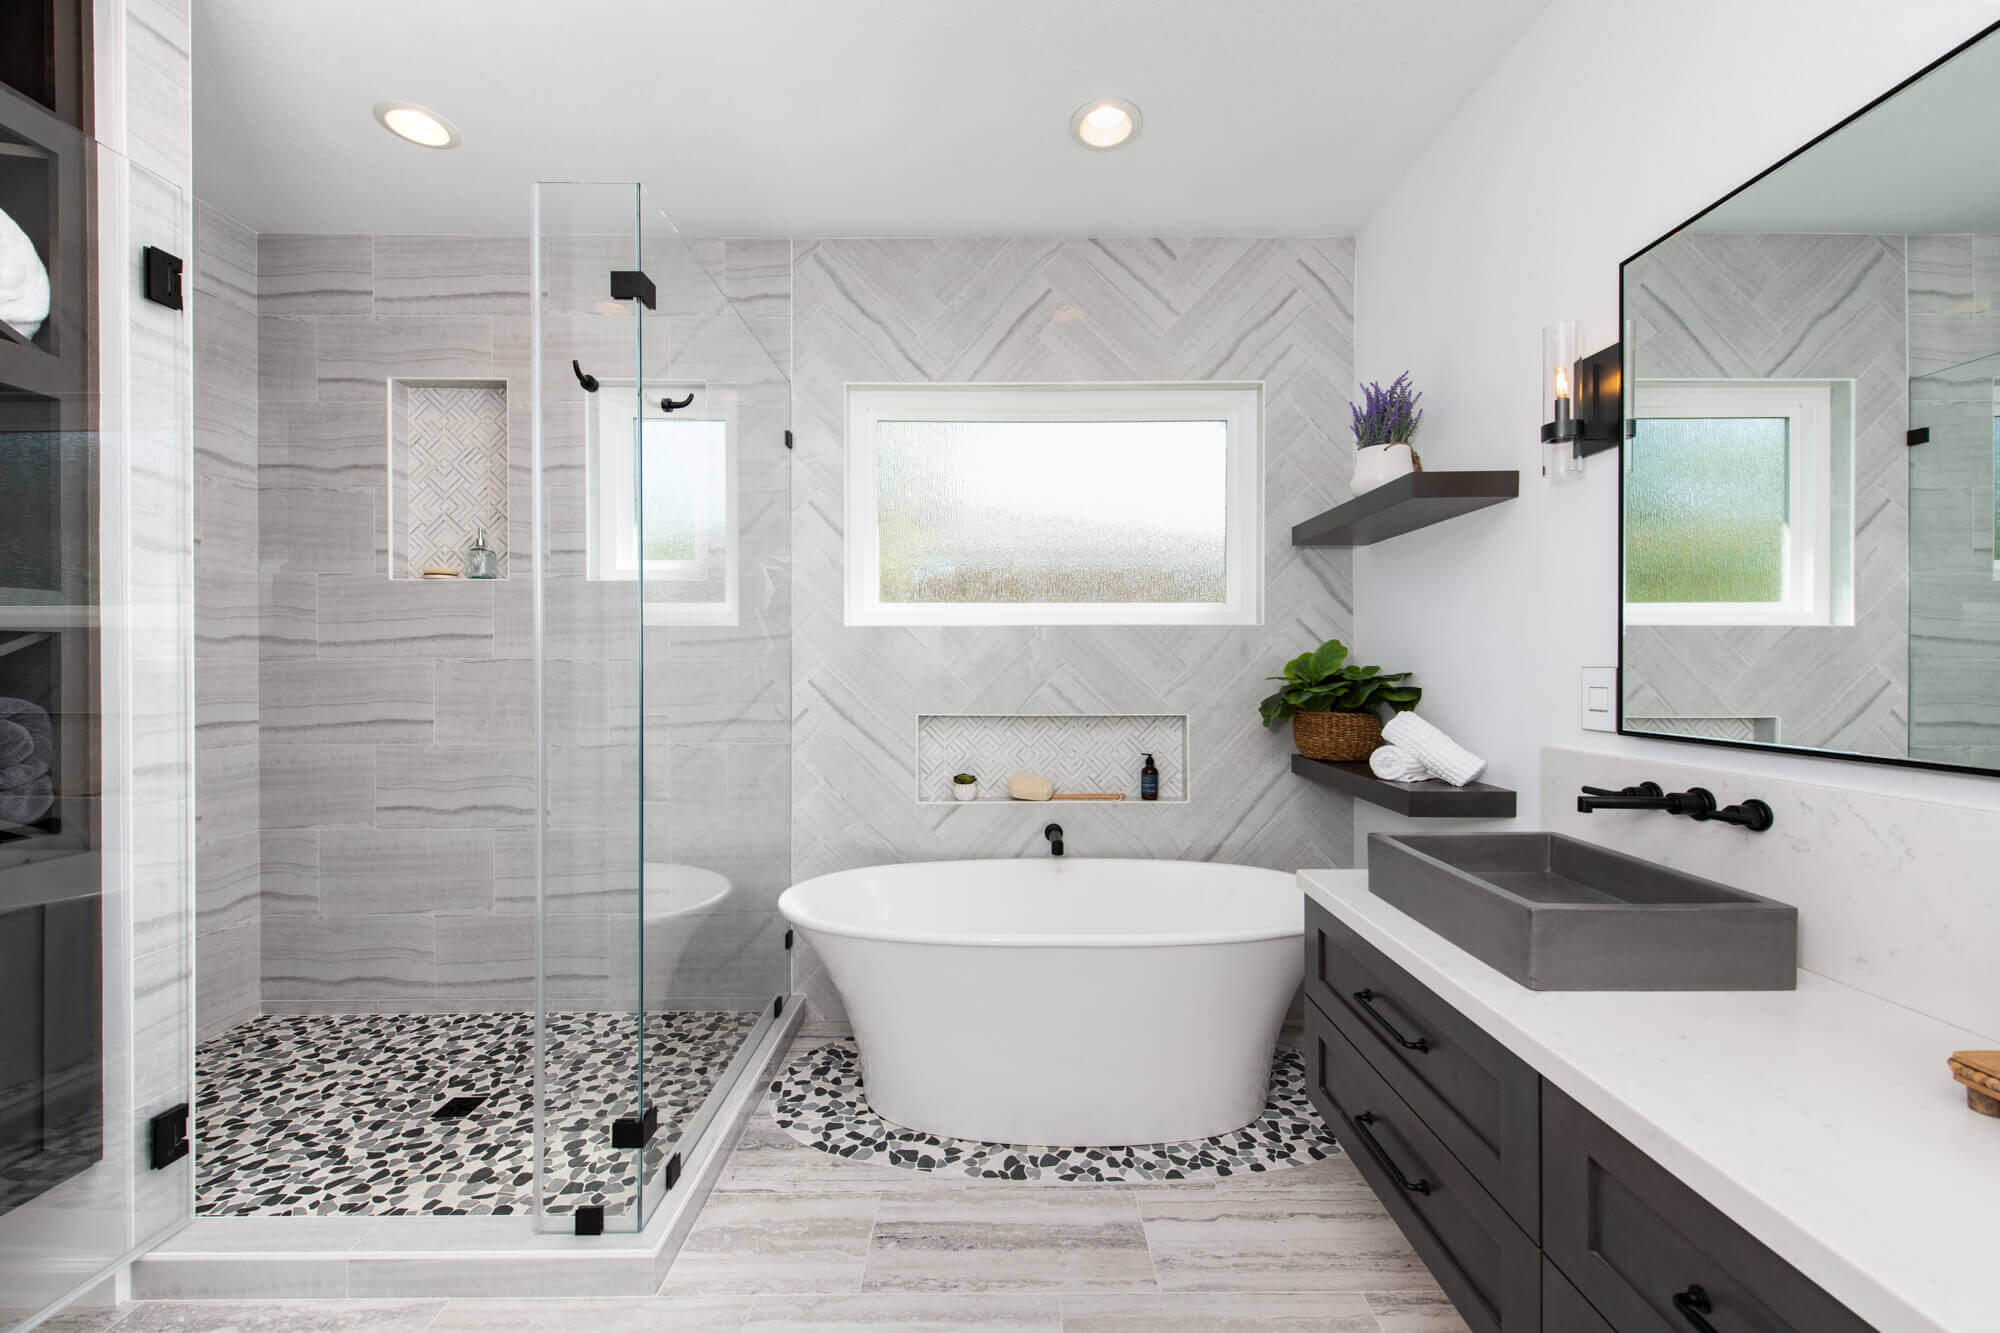 Design Considerations for Walk-In Showers in Small Bathrooms